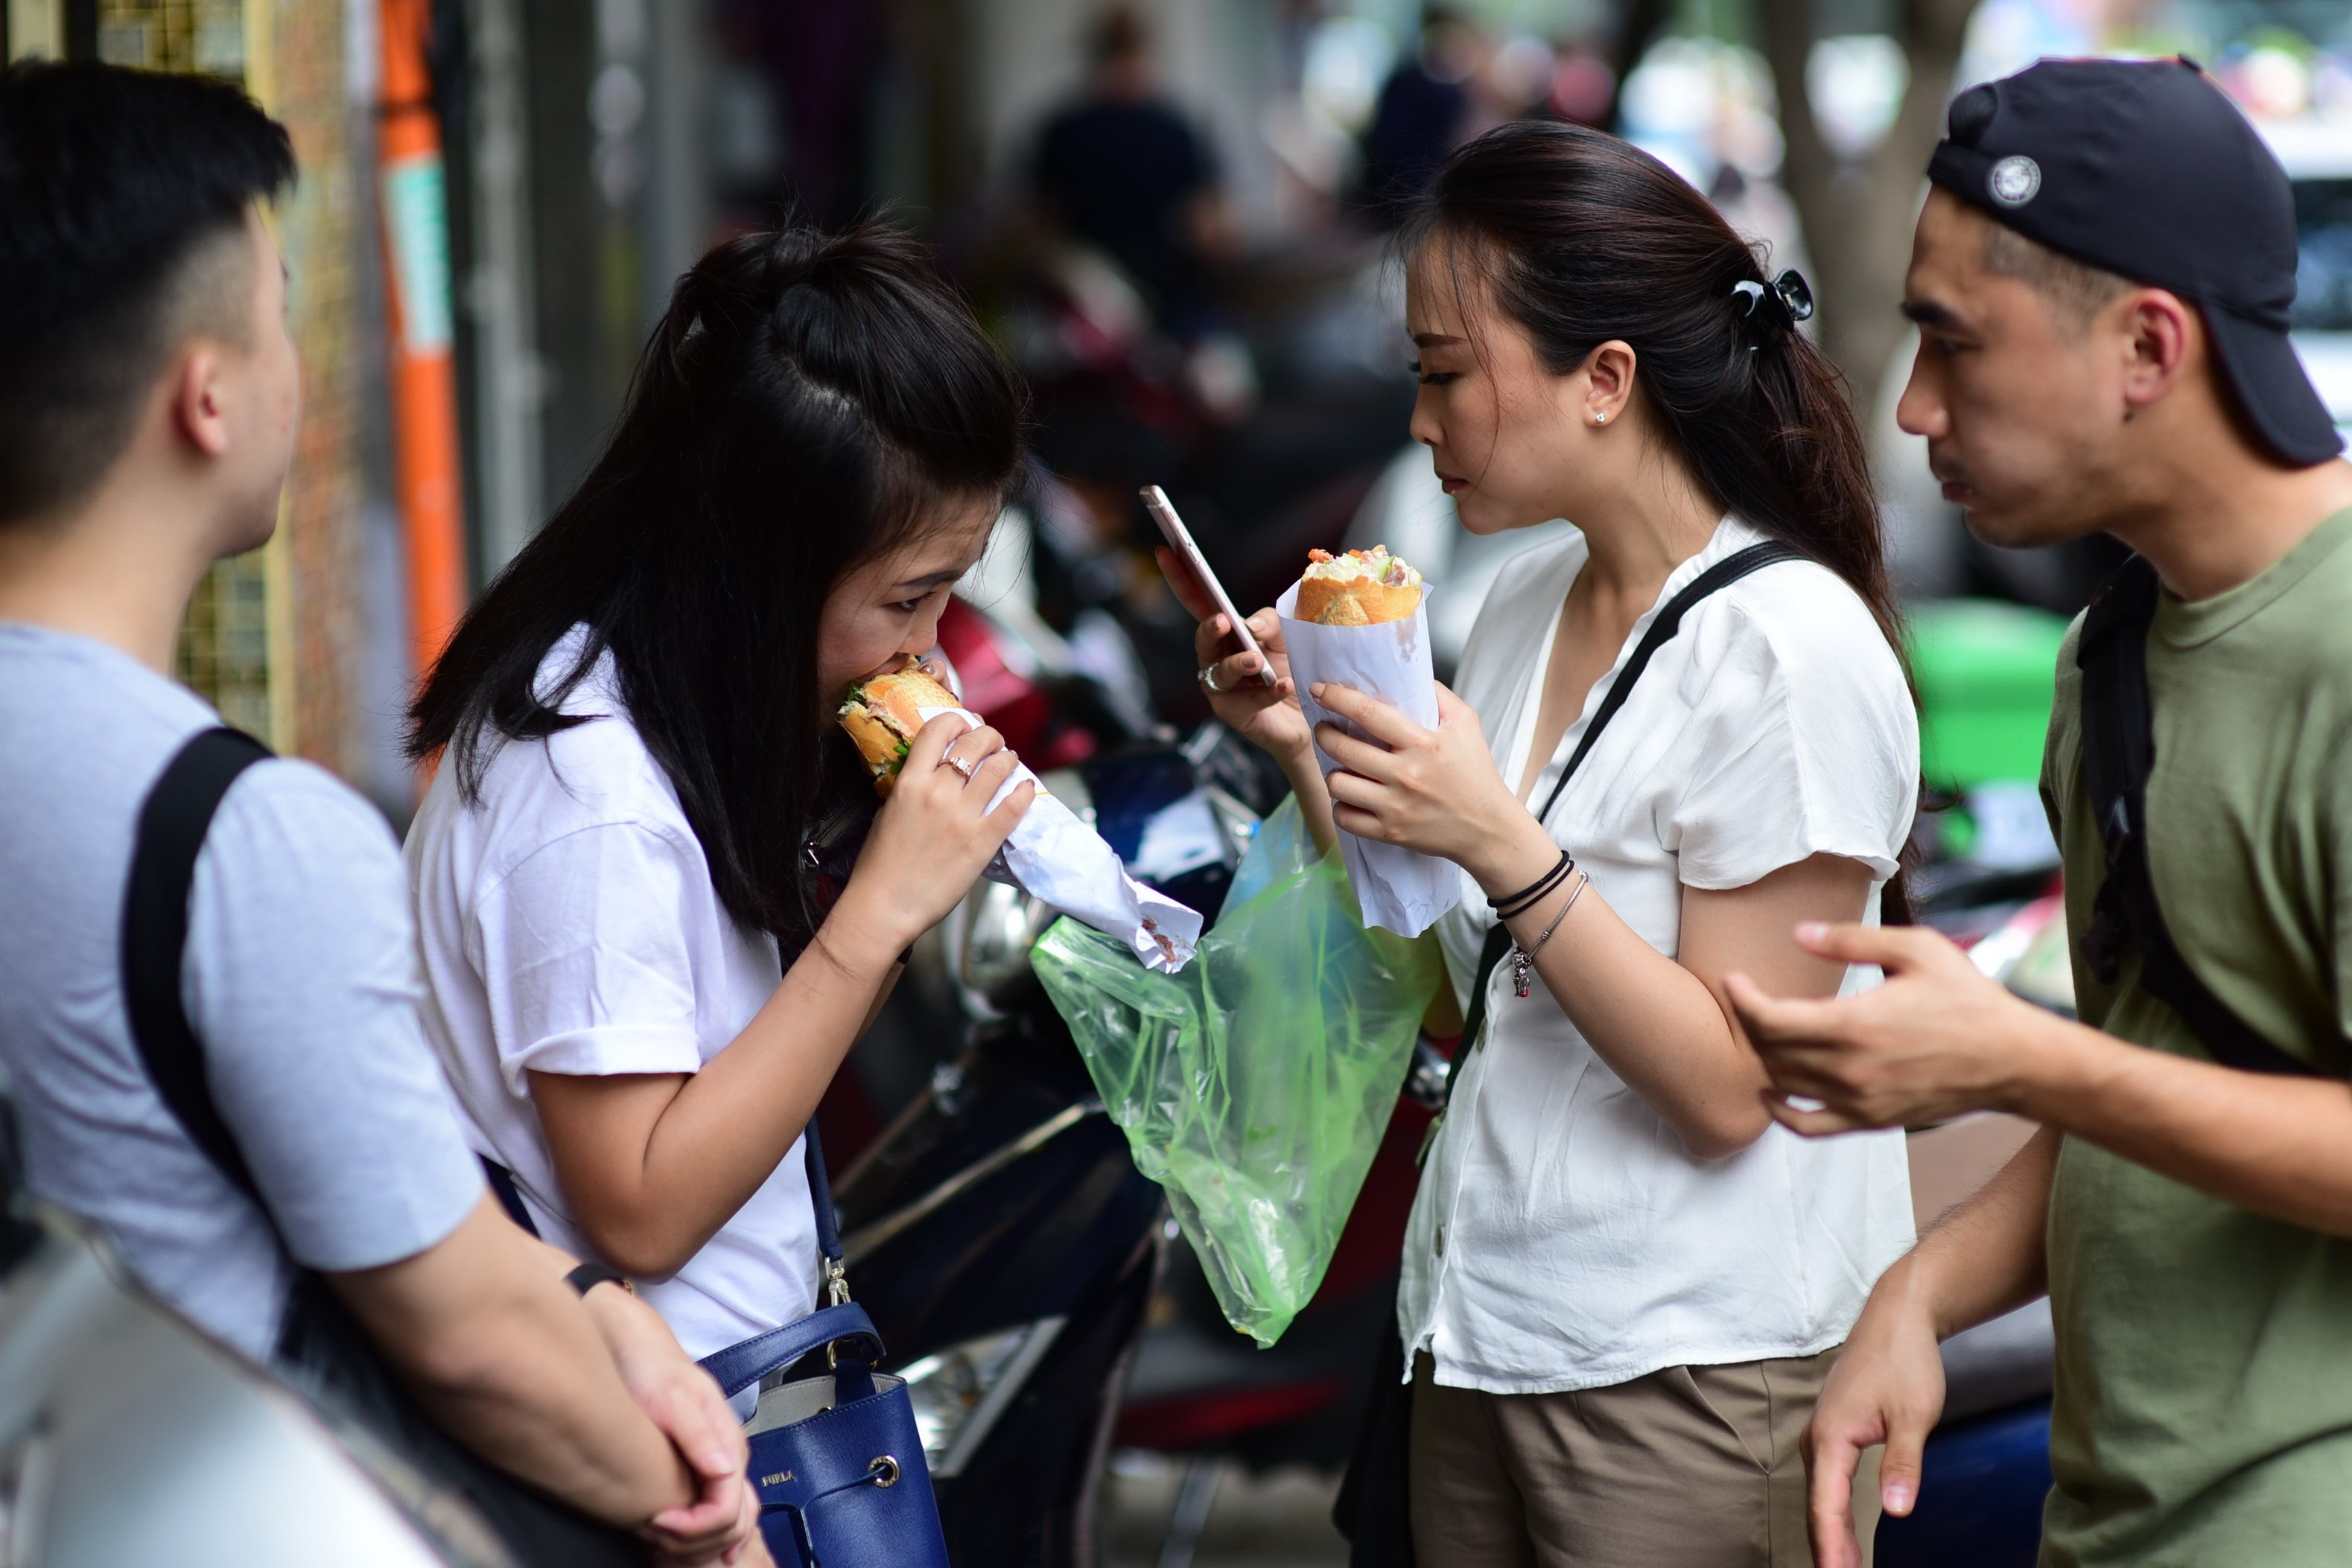 A file photo shows people enjoying banh mi on the street in Ho Chi Minh City. Photo: Quang Dinh / Tuoi Tre